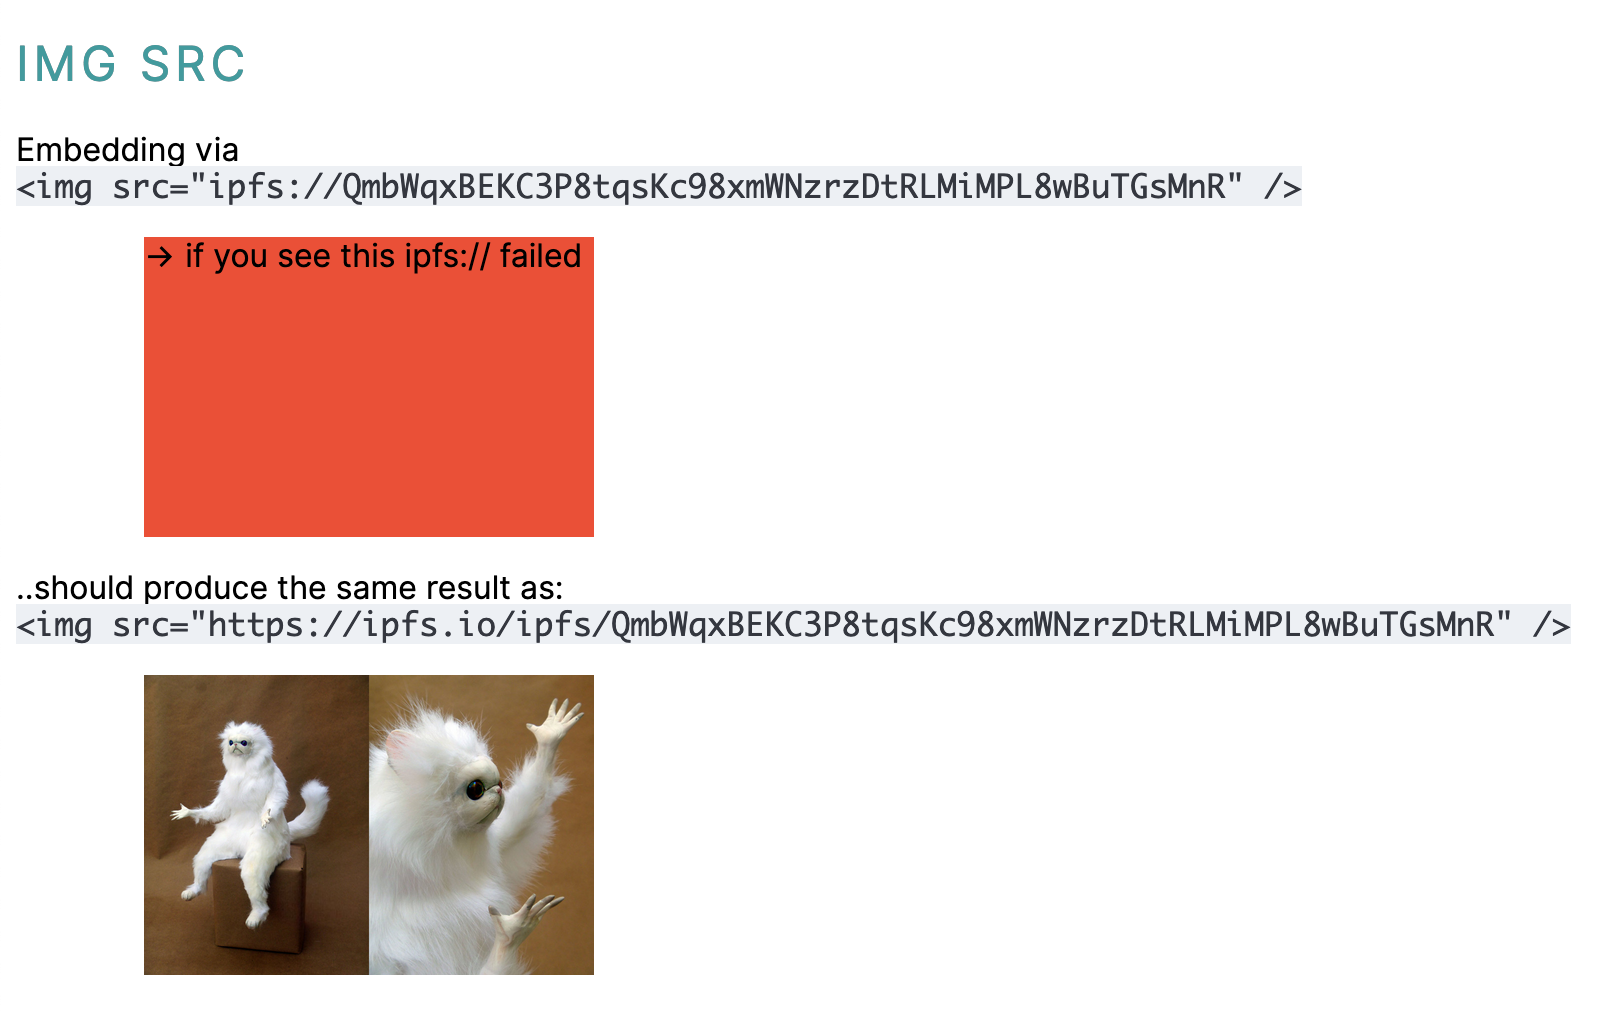 Screenshot of a failed image test in the IPFS protocol handler smoketests.